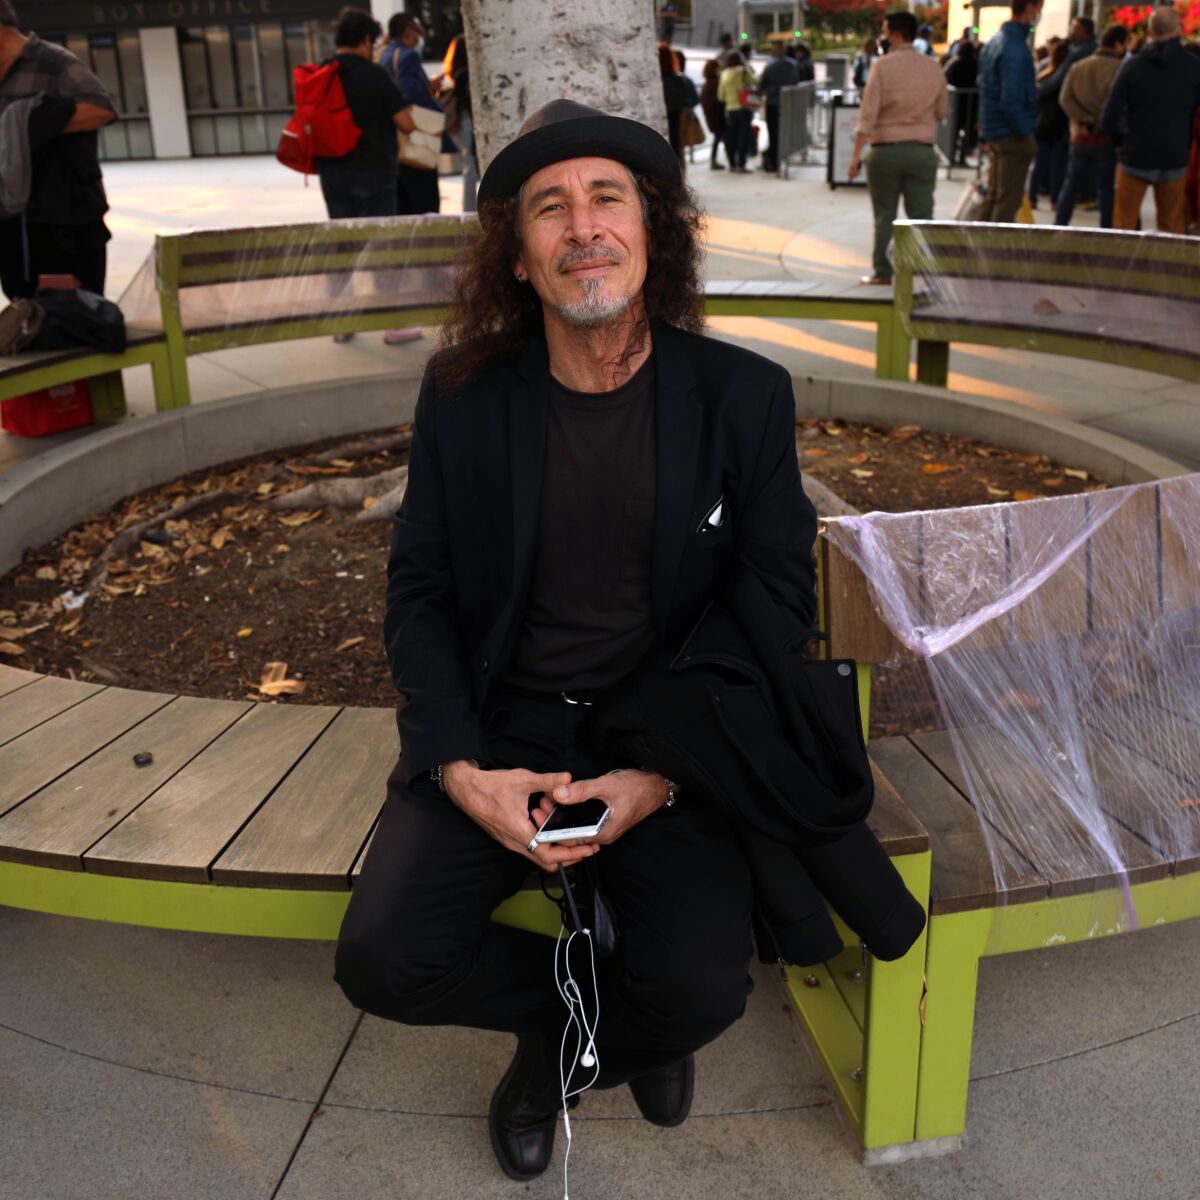 A man in a hat holds his phone as he poses for a photo seated on a bench.